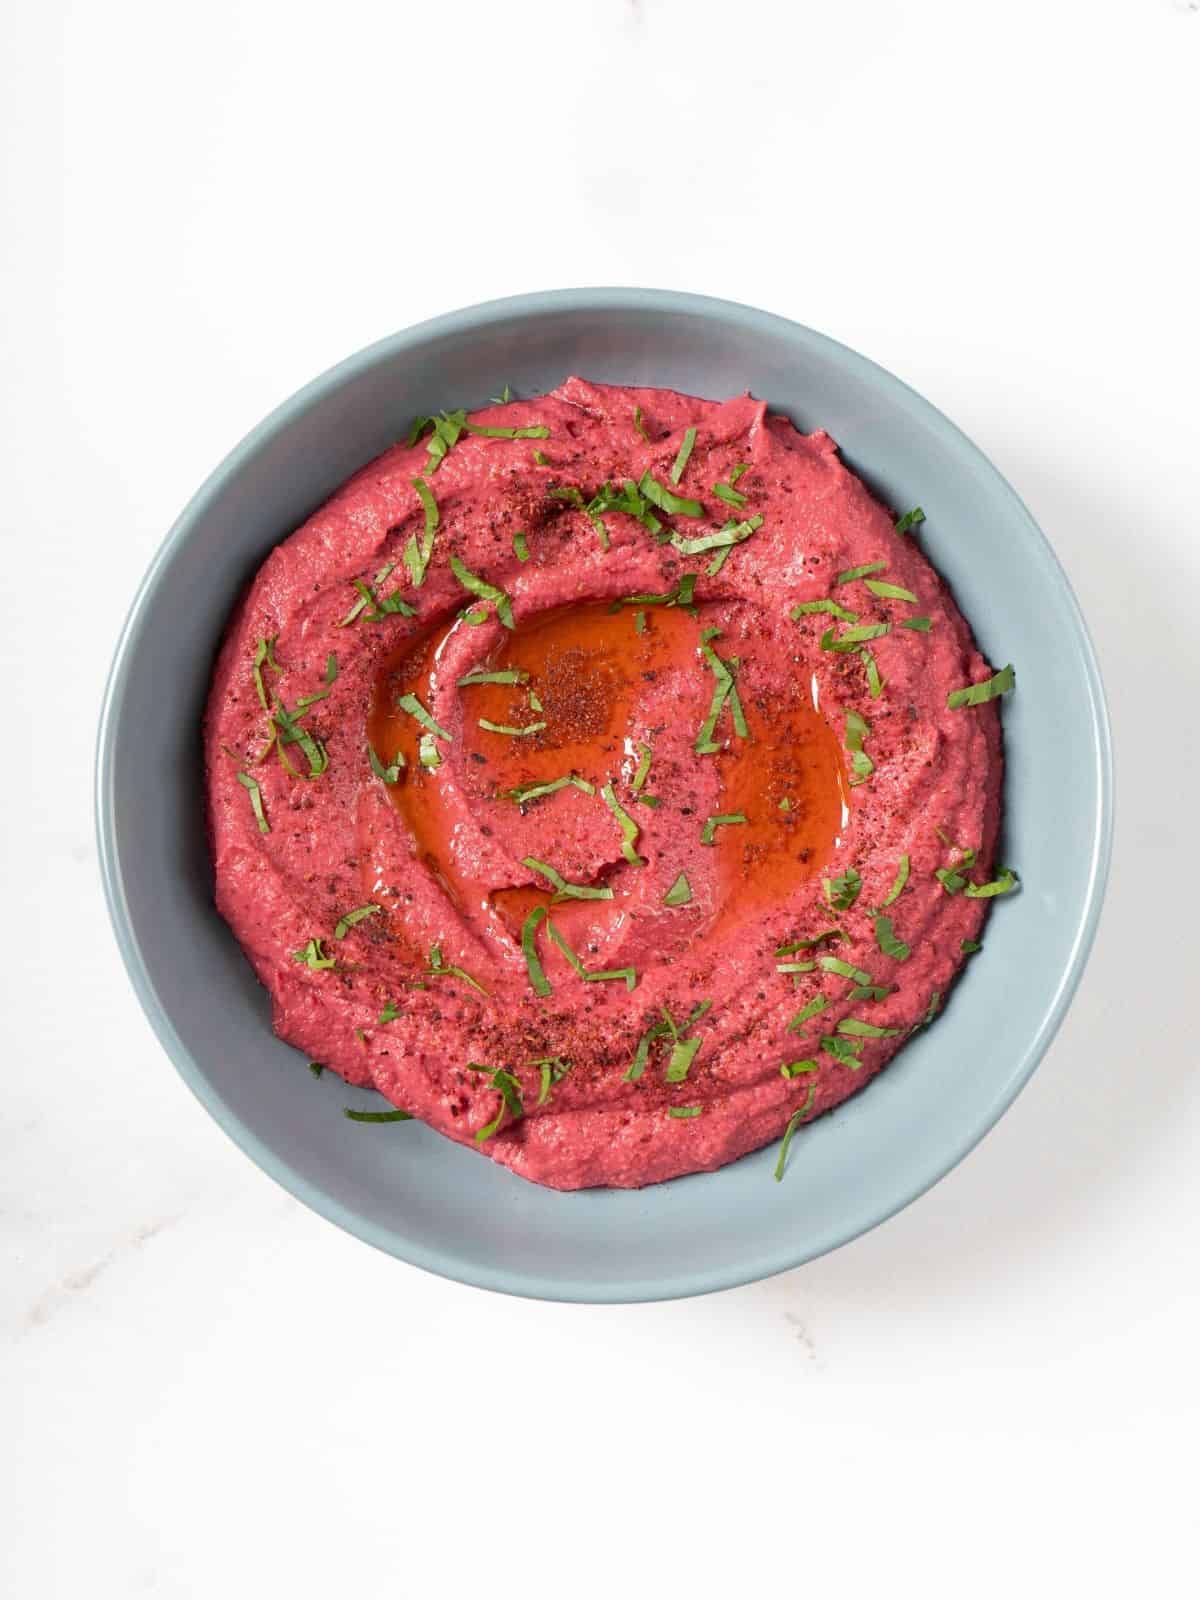 A bowl of pink beetroot hummus garnished with fresh herbs.